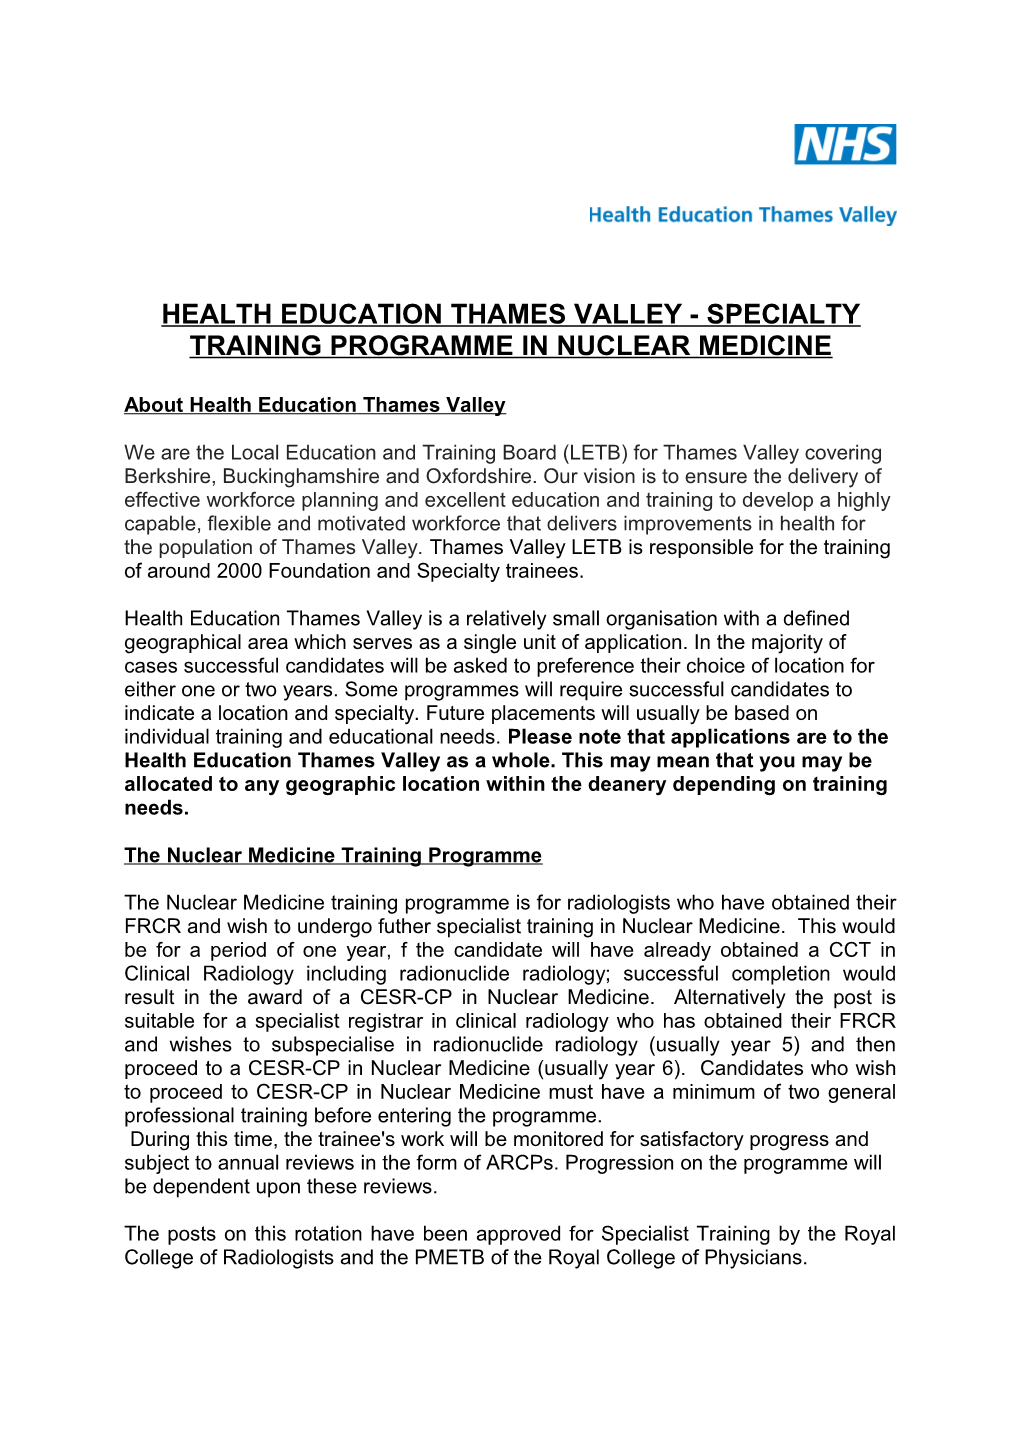 Health Education Thames Valley - Specialty Training Programme in Nuclear Medicine